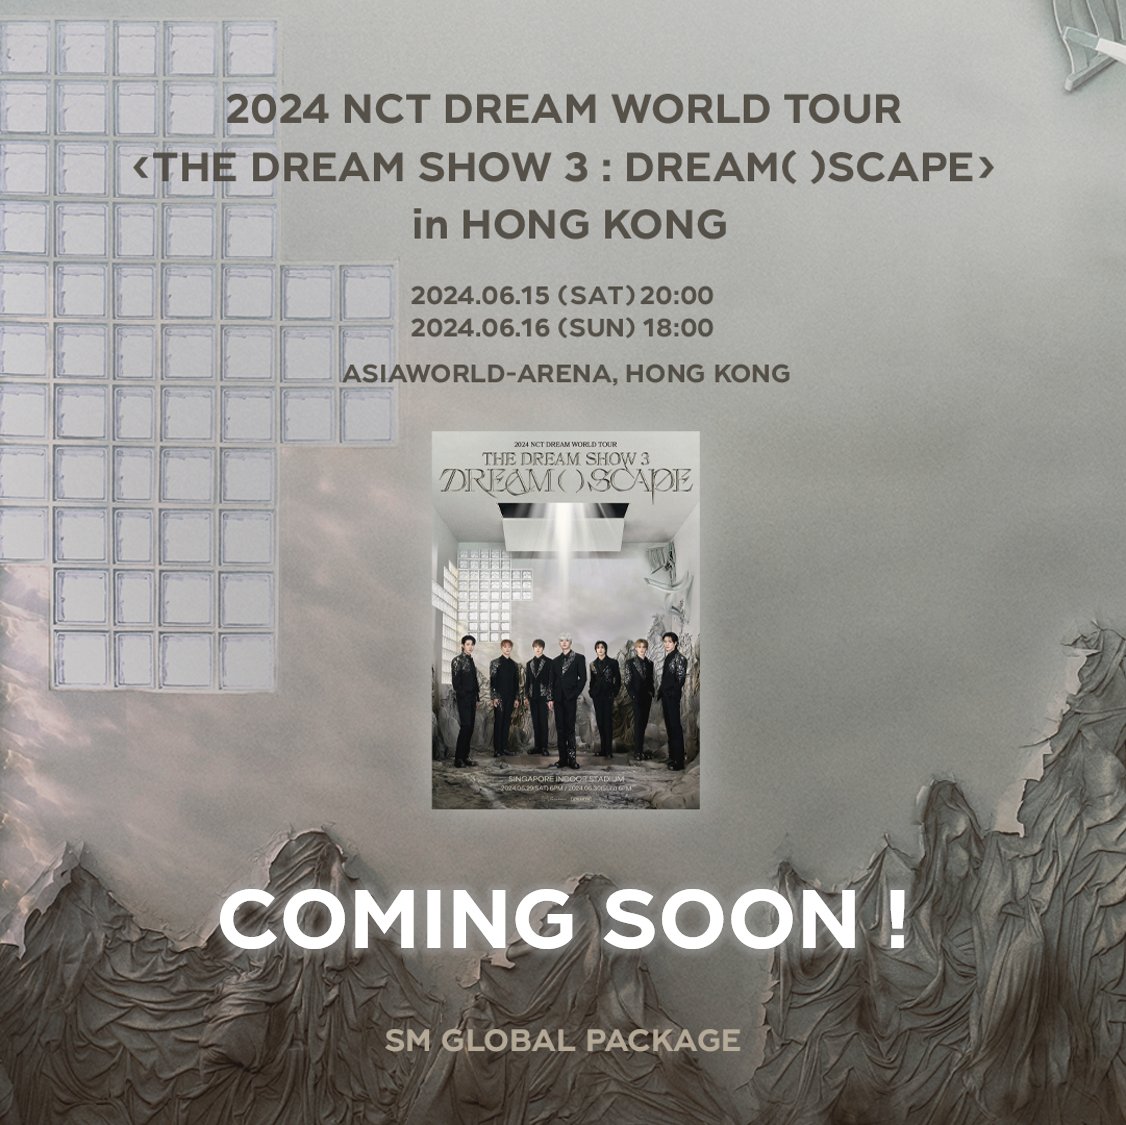 [2024 NCT DREAM WORLD TOUR <THE DREAM SHOW 3 : DREAM( )SCAPE> in HONG KONG] SM Global Package COMING SOON ! & ZZIM EVENT OPEN !

ZZIM EVENT : ~ 2024/04/26 (FRI) 10:00 (KST)

💚global.smtowntravel.com

#NCTDREAM #THEDREAMSHOW3
#NCTDREAM_WORLDTOUR
#SMGLOBALPACKAGE #全球套餐 #グロパ